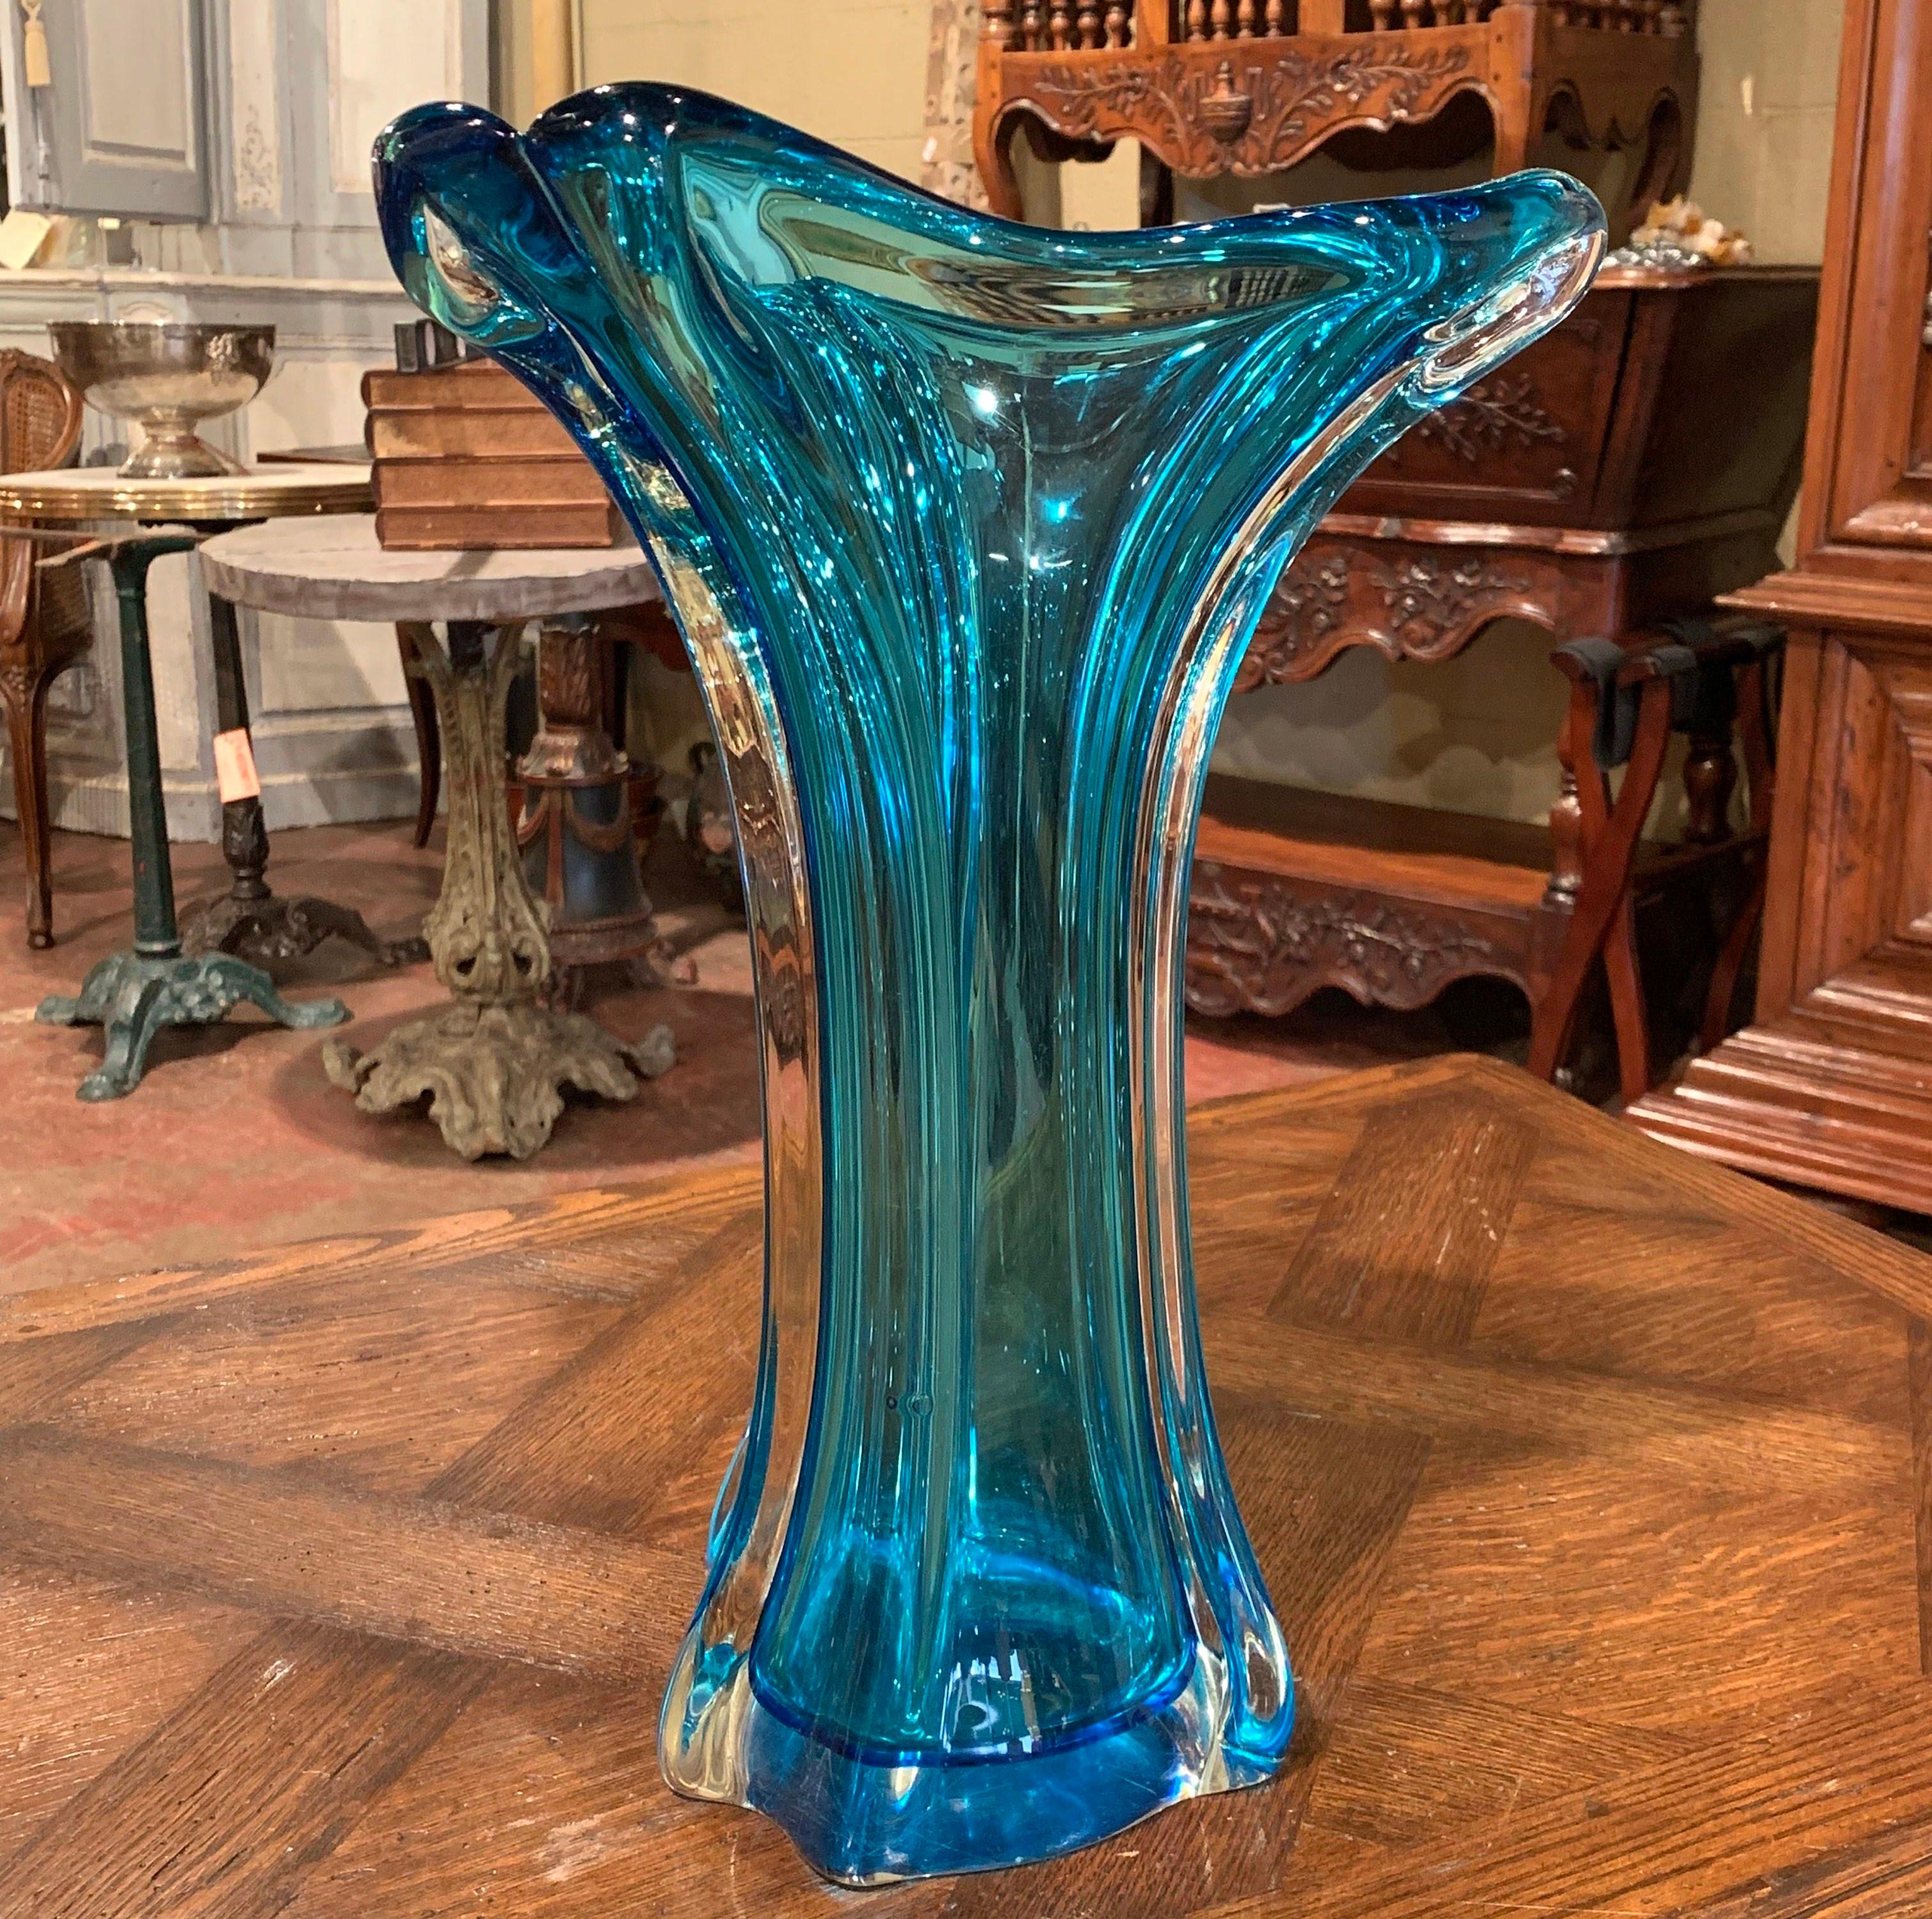 Decorate a table in your breakfast nook or entry way by filling this elegant, vintage vase with a bouquet of fresh flowers. Crafted in France circa 1950, the tall, Art Deco glass vase is hand blown for a unique, organic shape with a wide mouth at